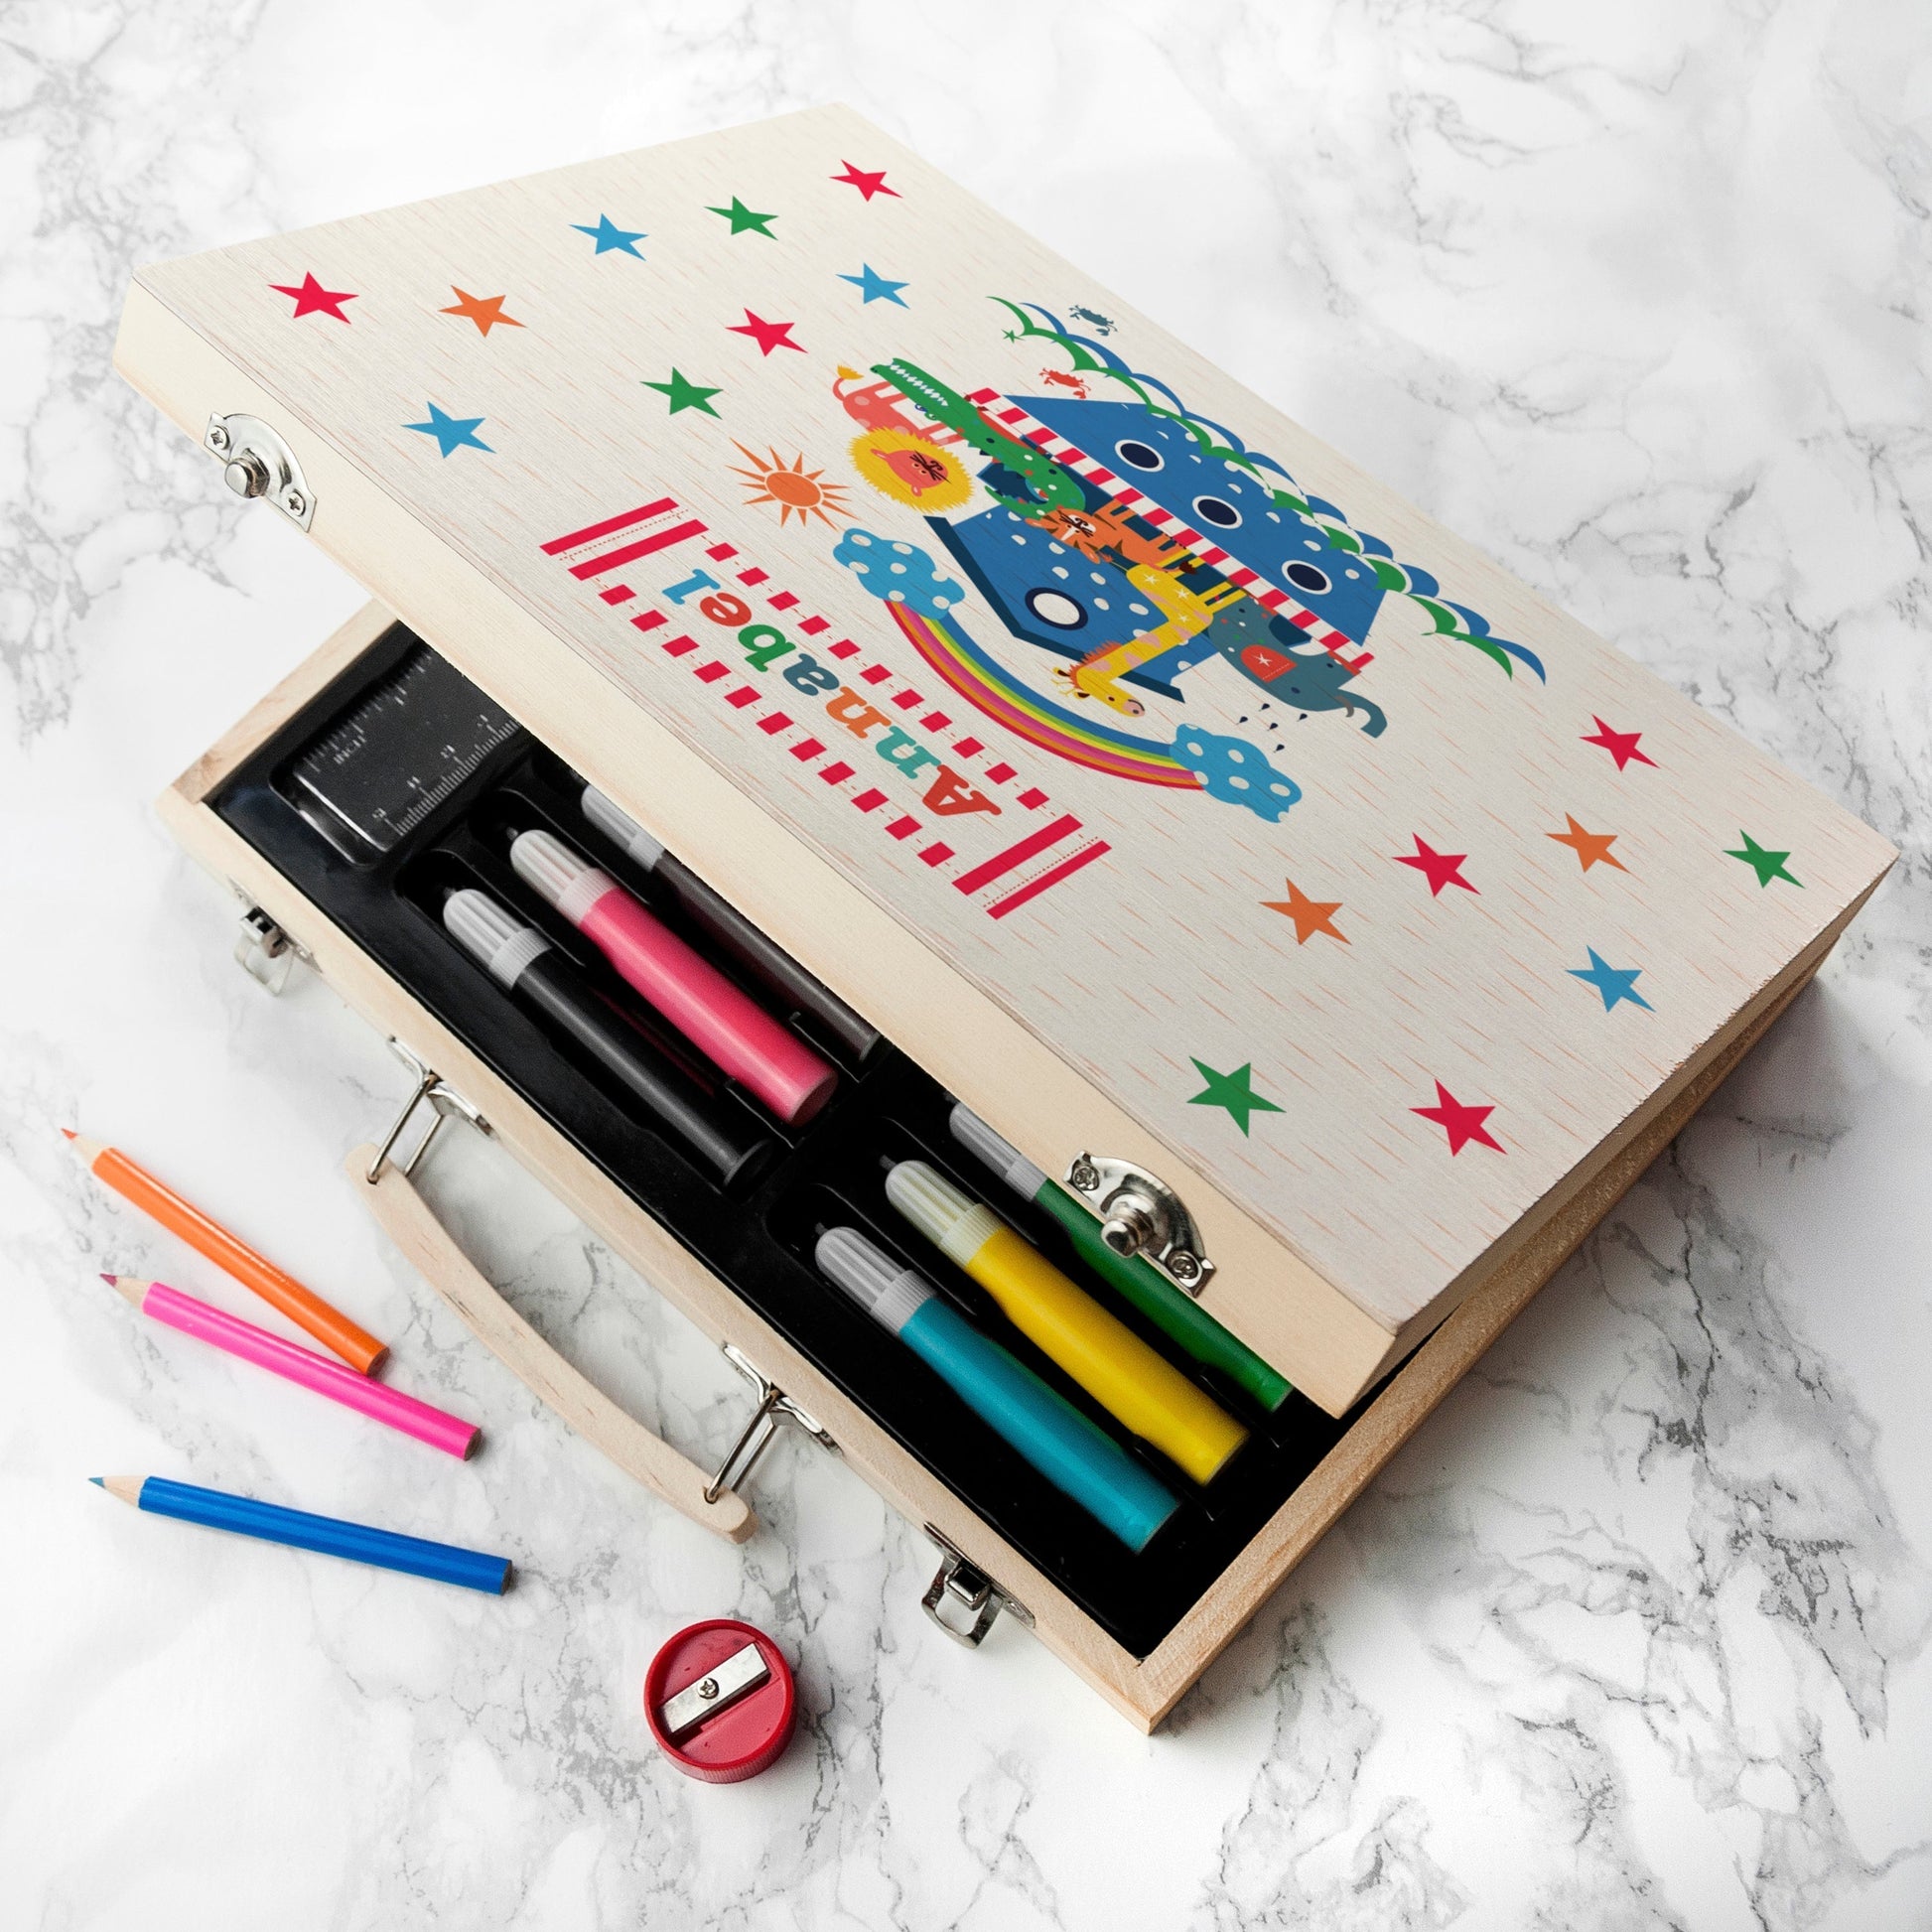 Personalized Art and Craft Sets - Personalized Kid’s Noah's Ark Colouring Set 